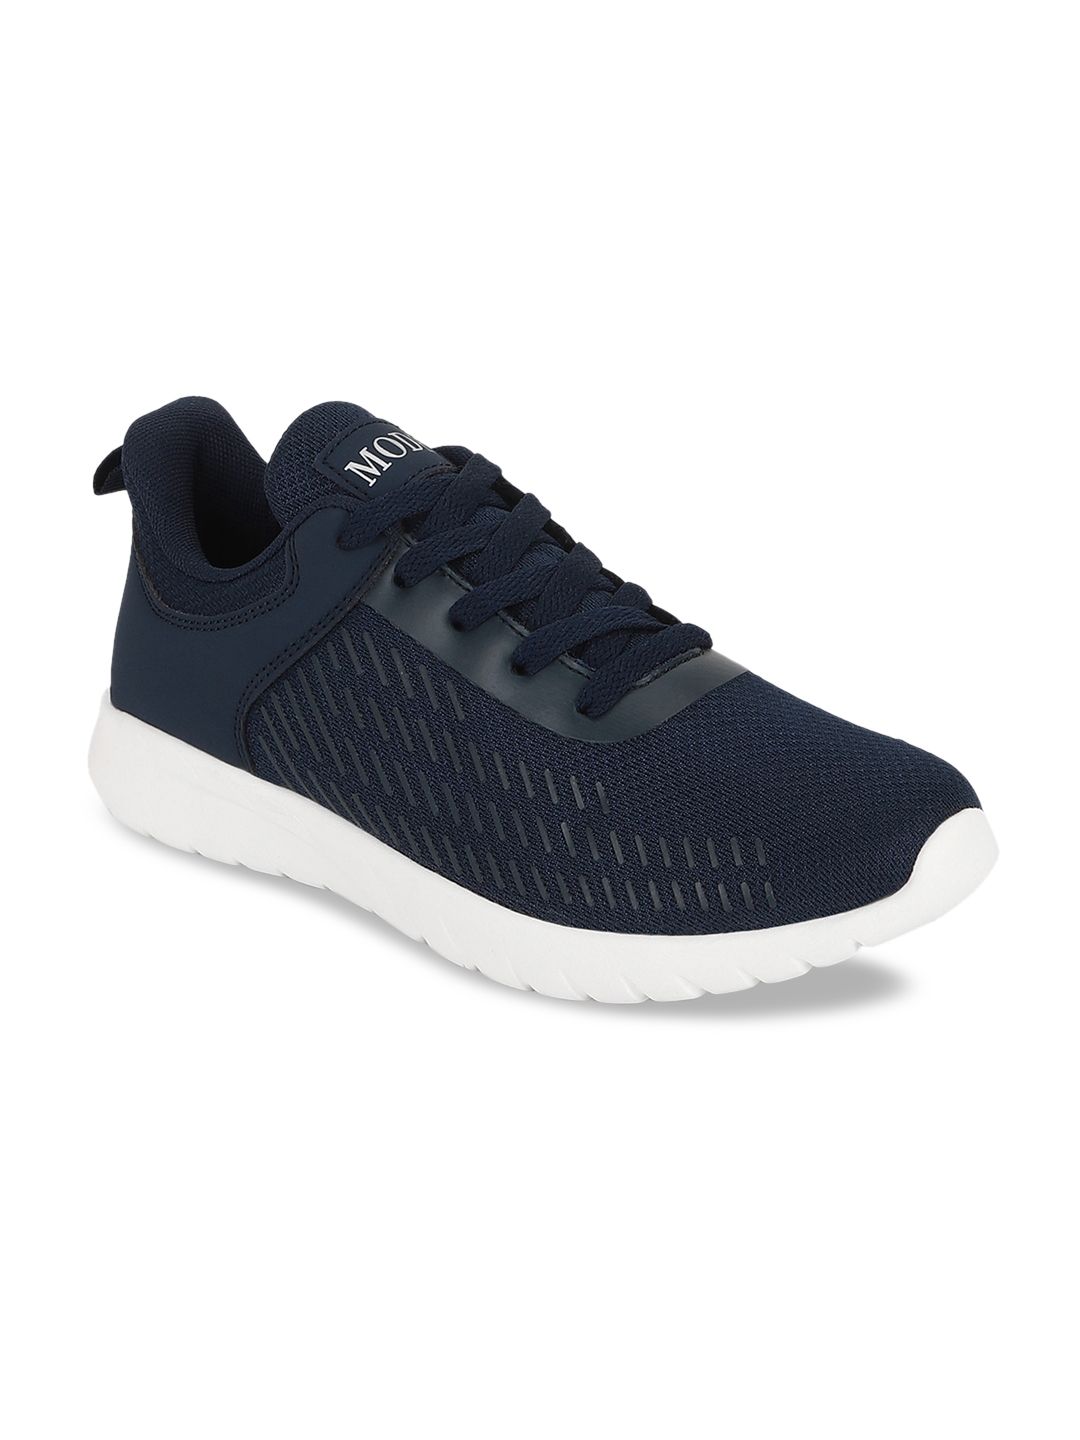 Buy Mode By Red Tape Women Navy Blue Mesh Walking Shoes - Sports Shoes ...